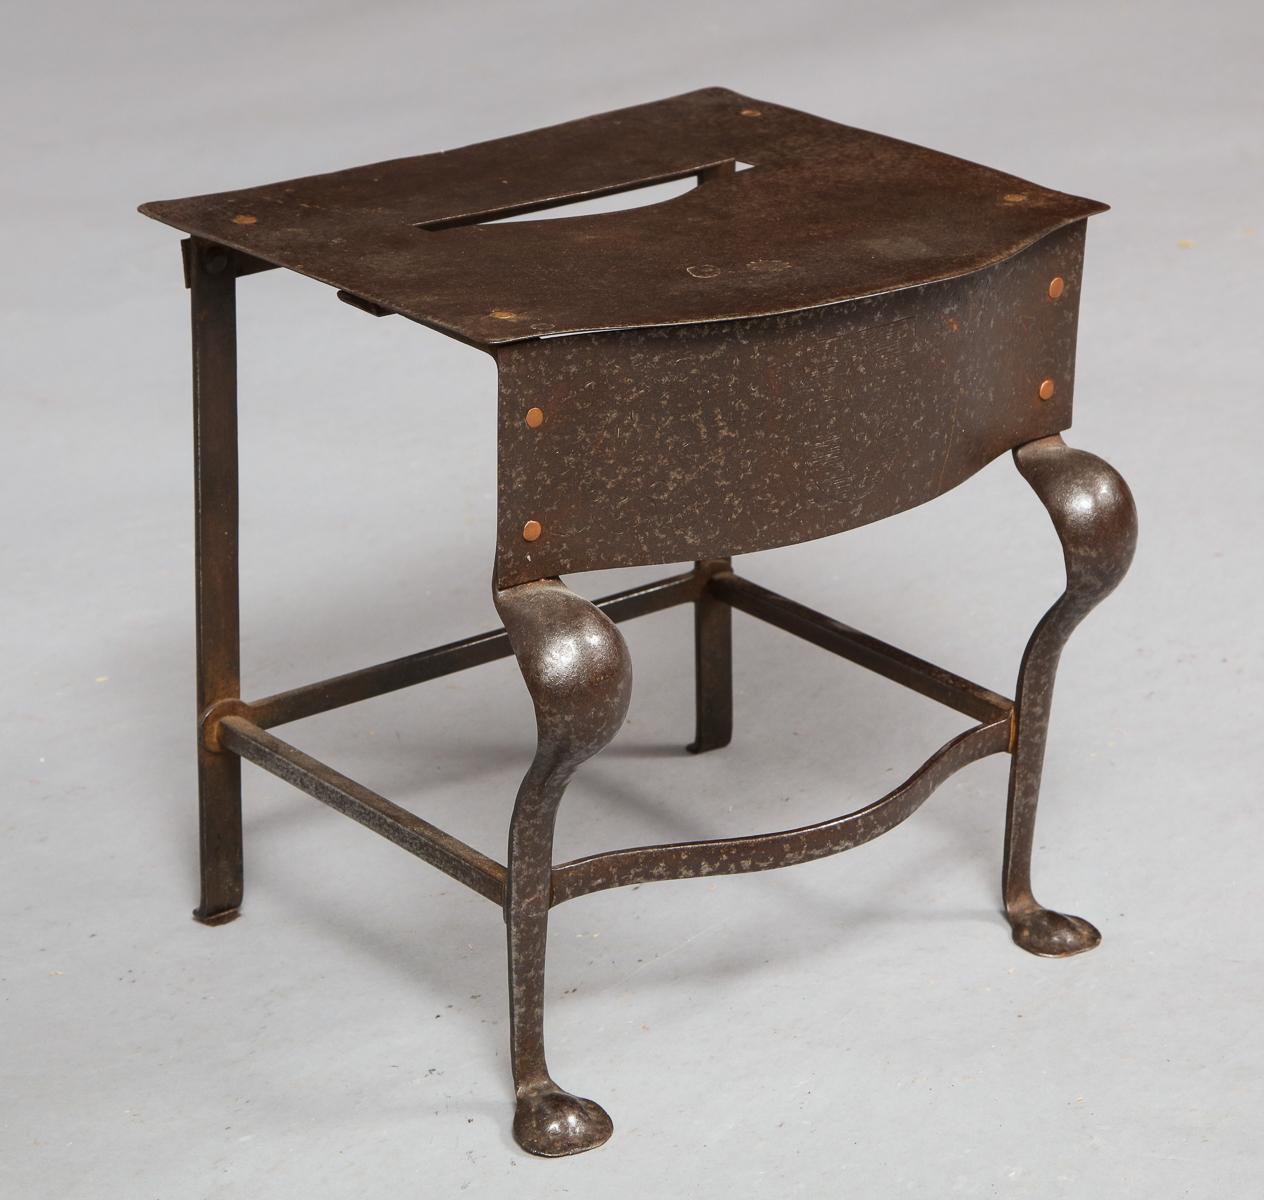 English early 19th century steel footman or trivet with bow fronted top having hand hold cutout over two cabriole front legs ending in penny feet, the rear straight legs joined by box stretchers, having nicely patinated surface.